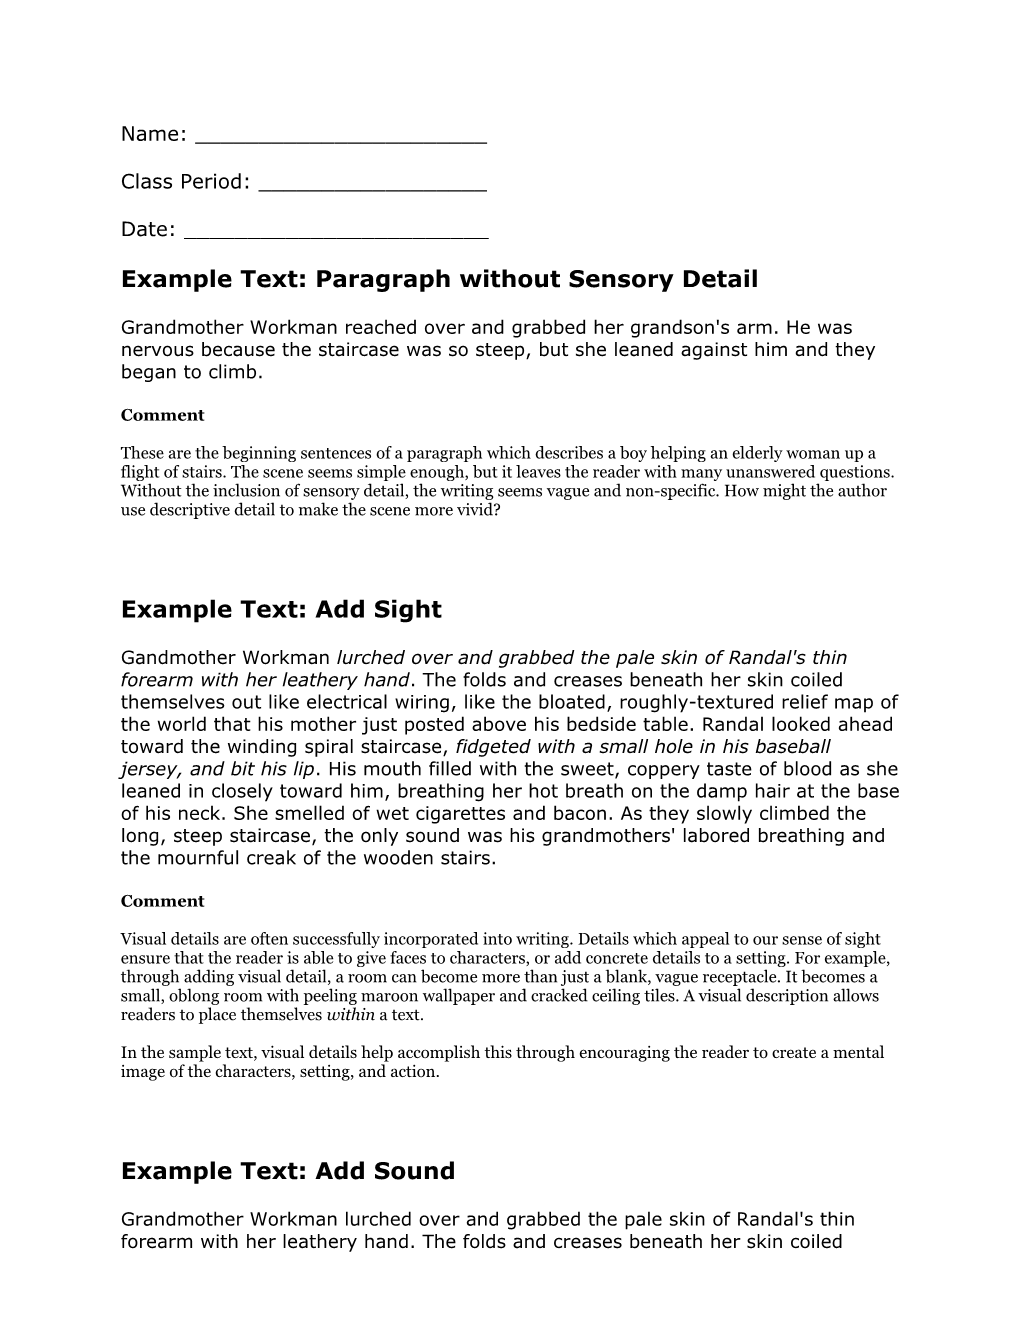 Example Text: Paragraph Without Sensory Detail